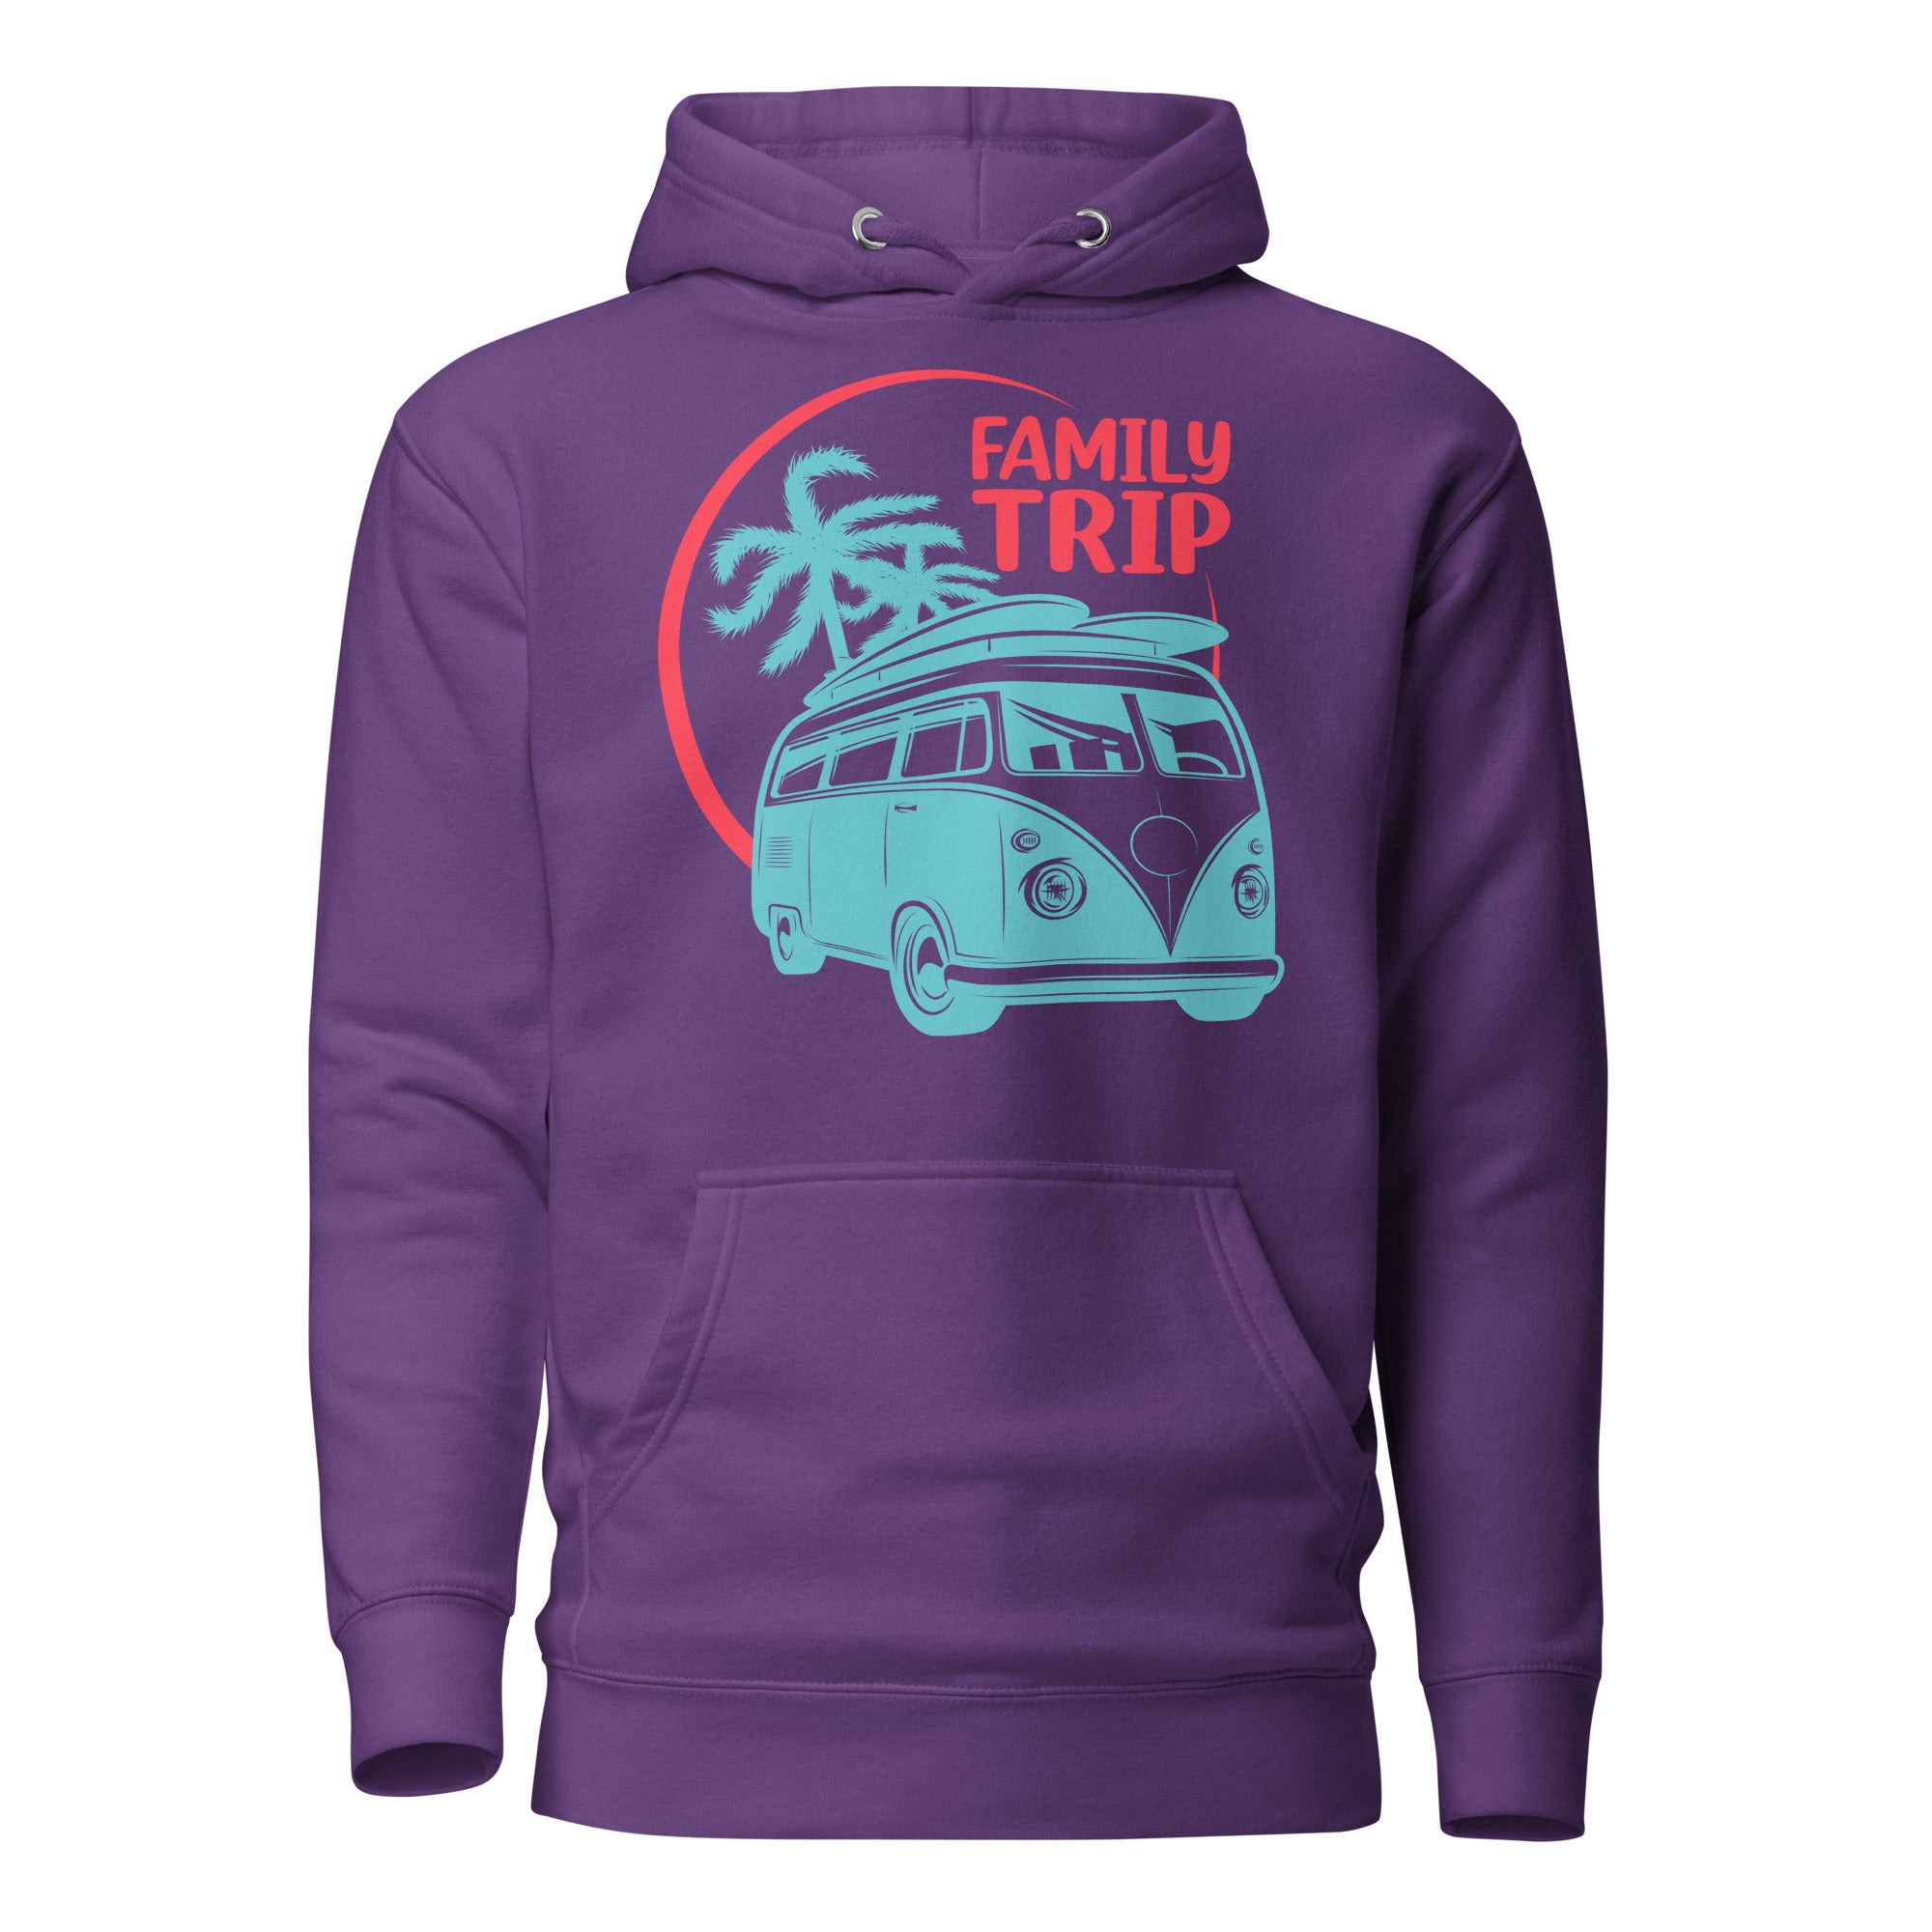 Family Summer Beach Vacation - Hoodie